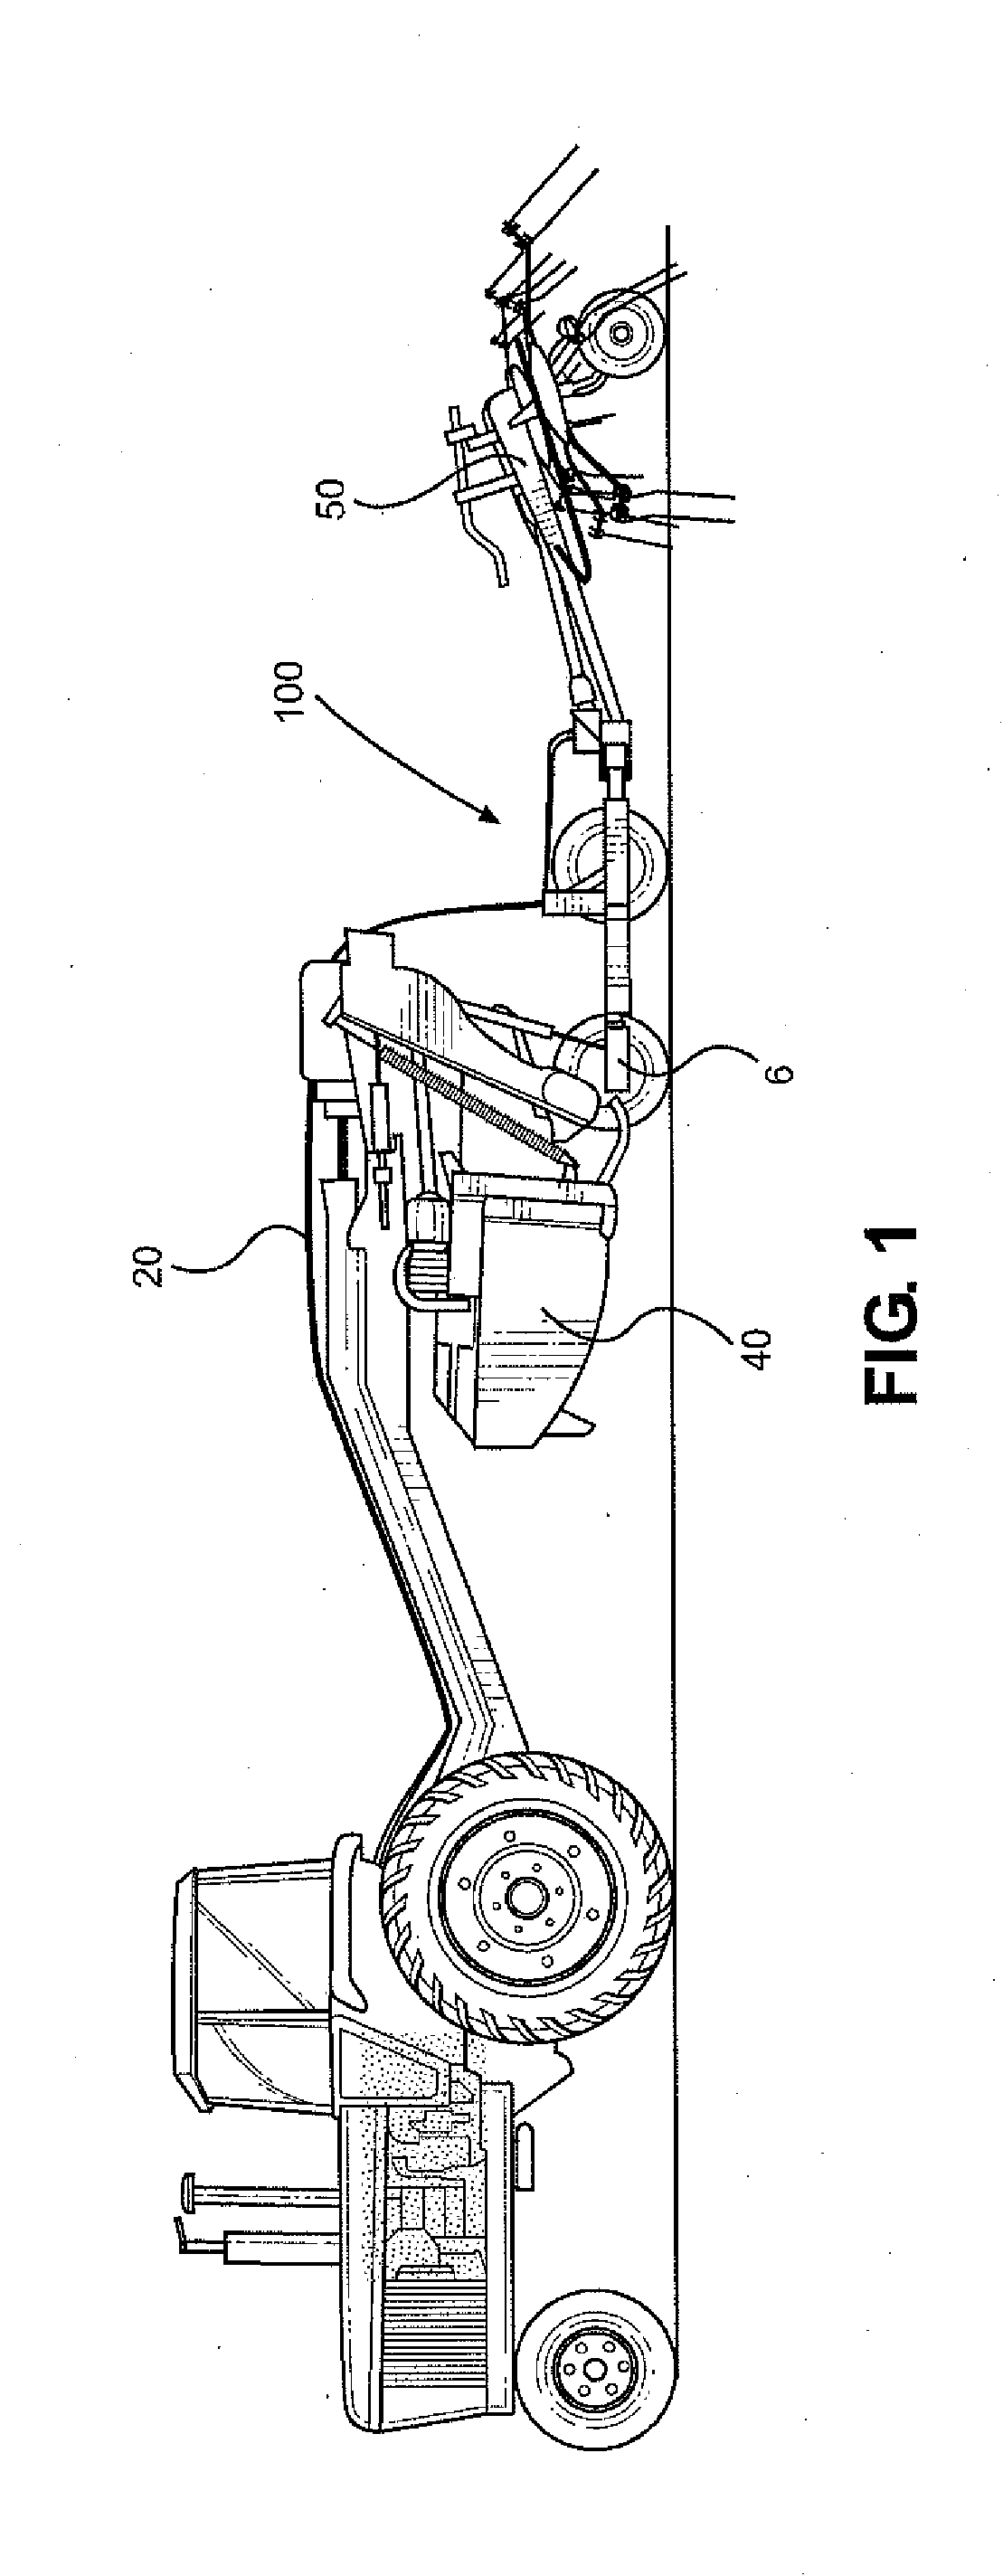 Coupling device to connect two tractor-pulled agricultural implements for tandem-powered operation